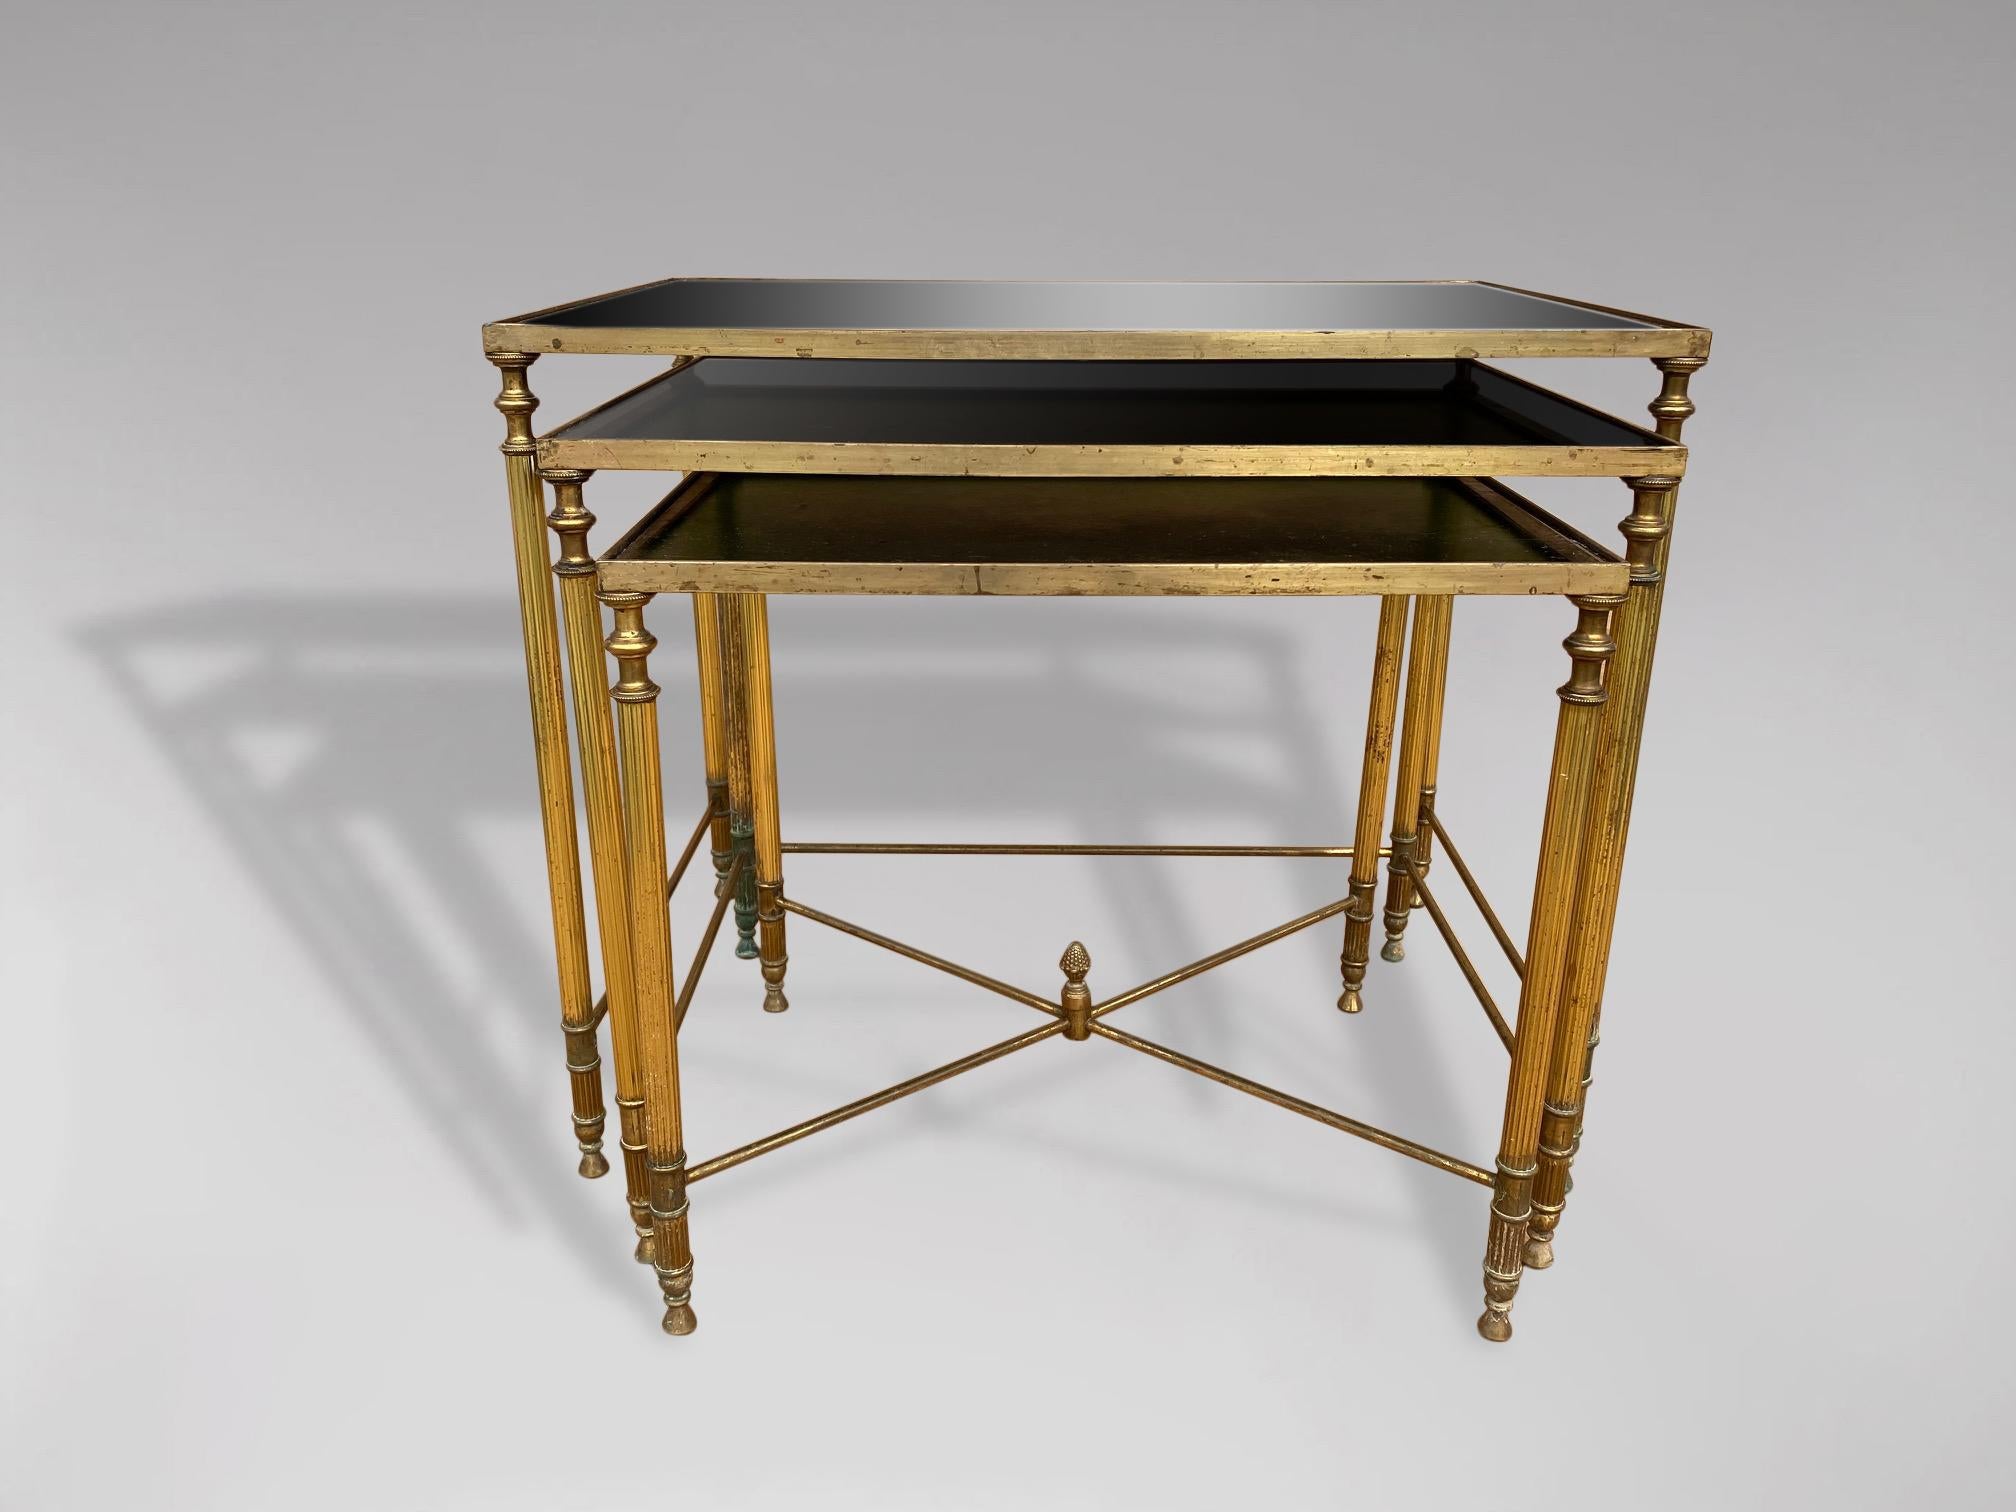 Hollywood Regency 20th Century Nest of 3 Brass Tables with Gold Leaf Glass Tops